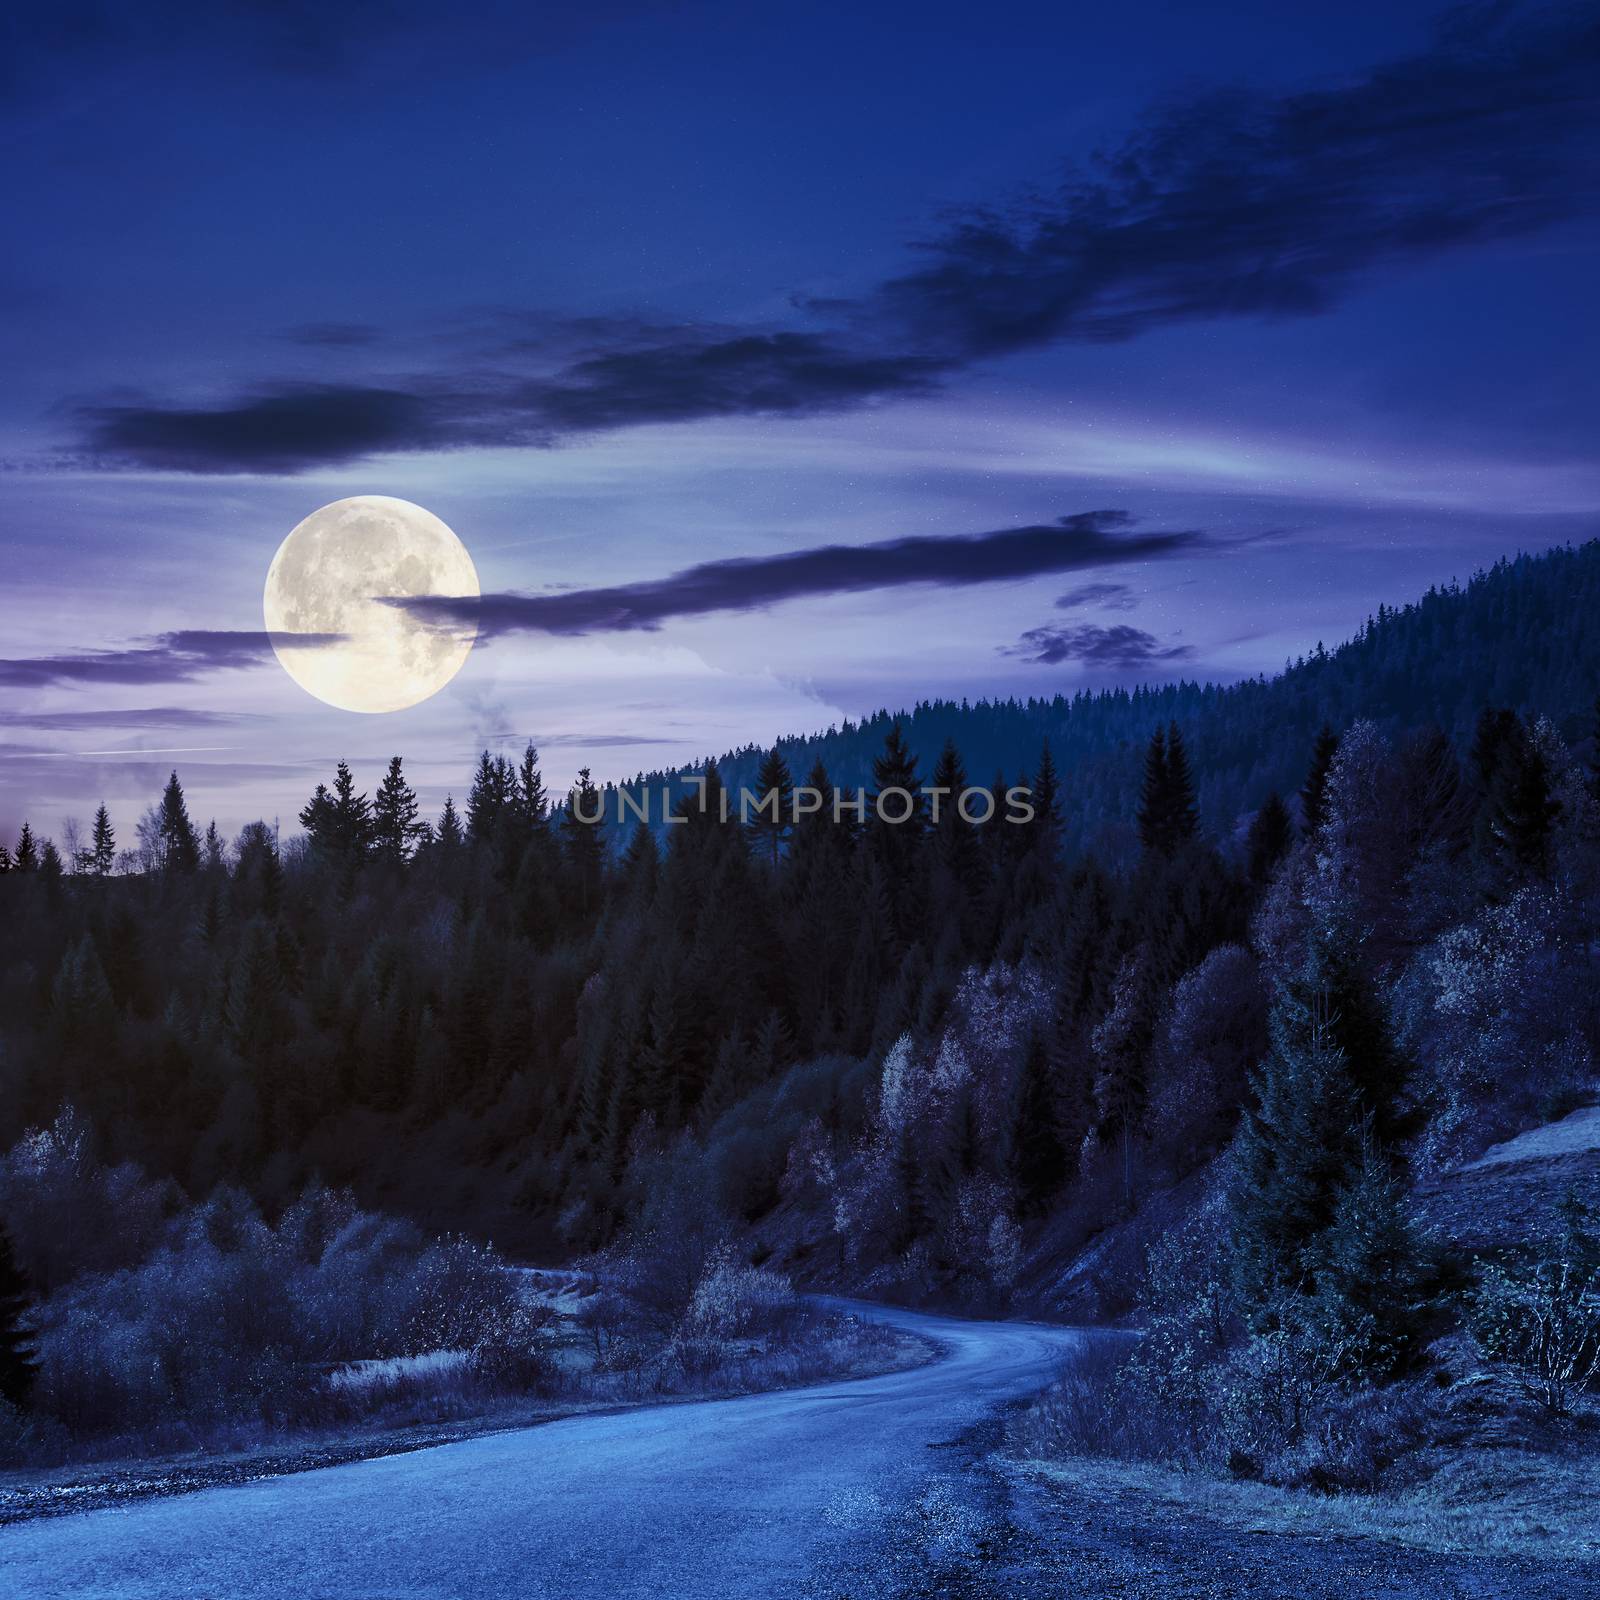 autumn mountain landscape. asphalt road going to mountains passes through the ever green coniferous shaded forest at night in full moon light